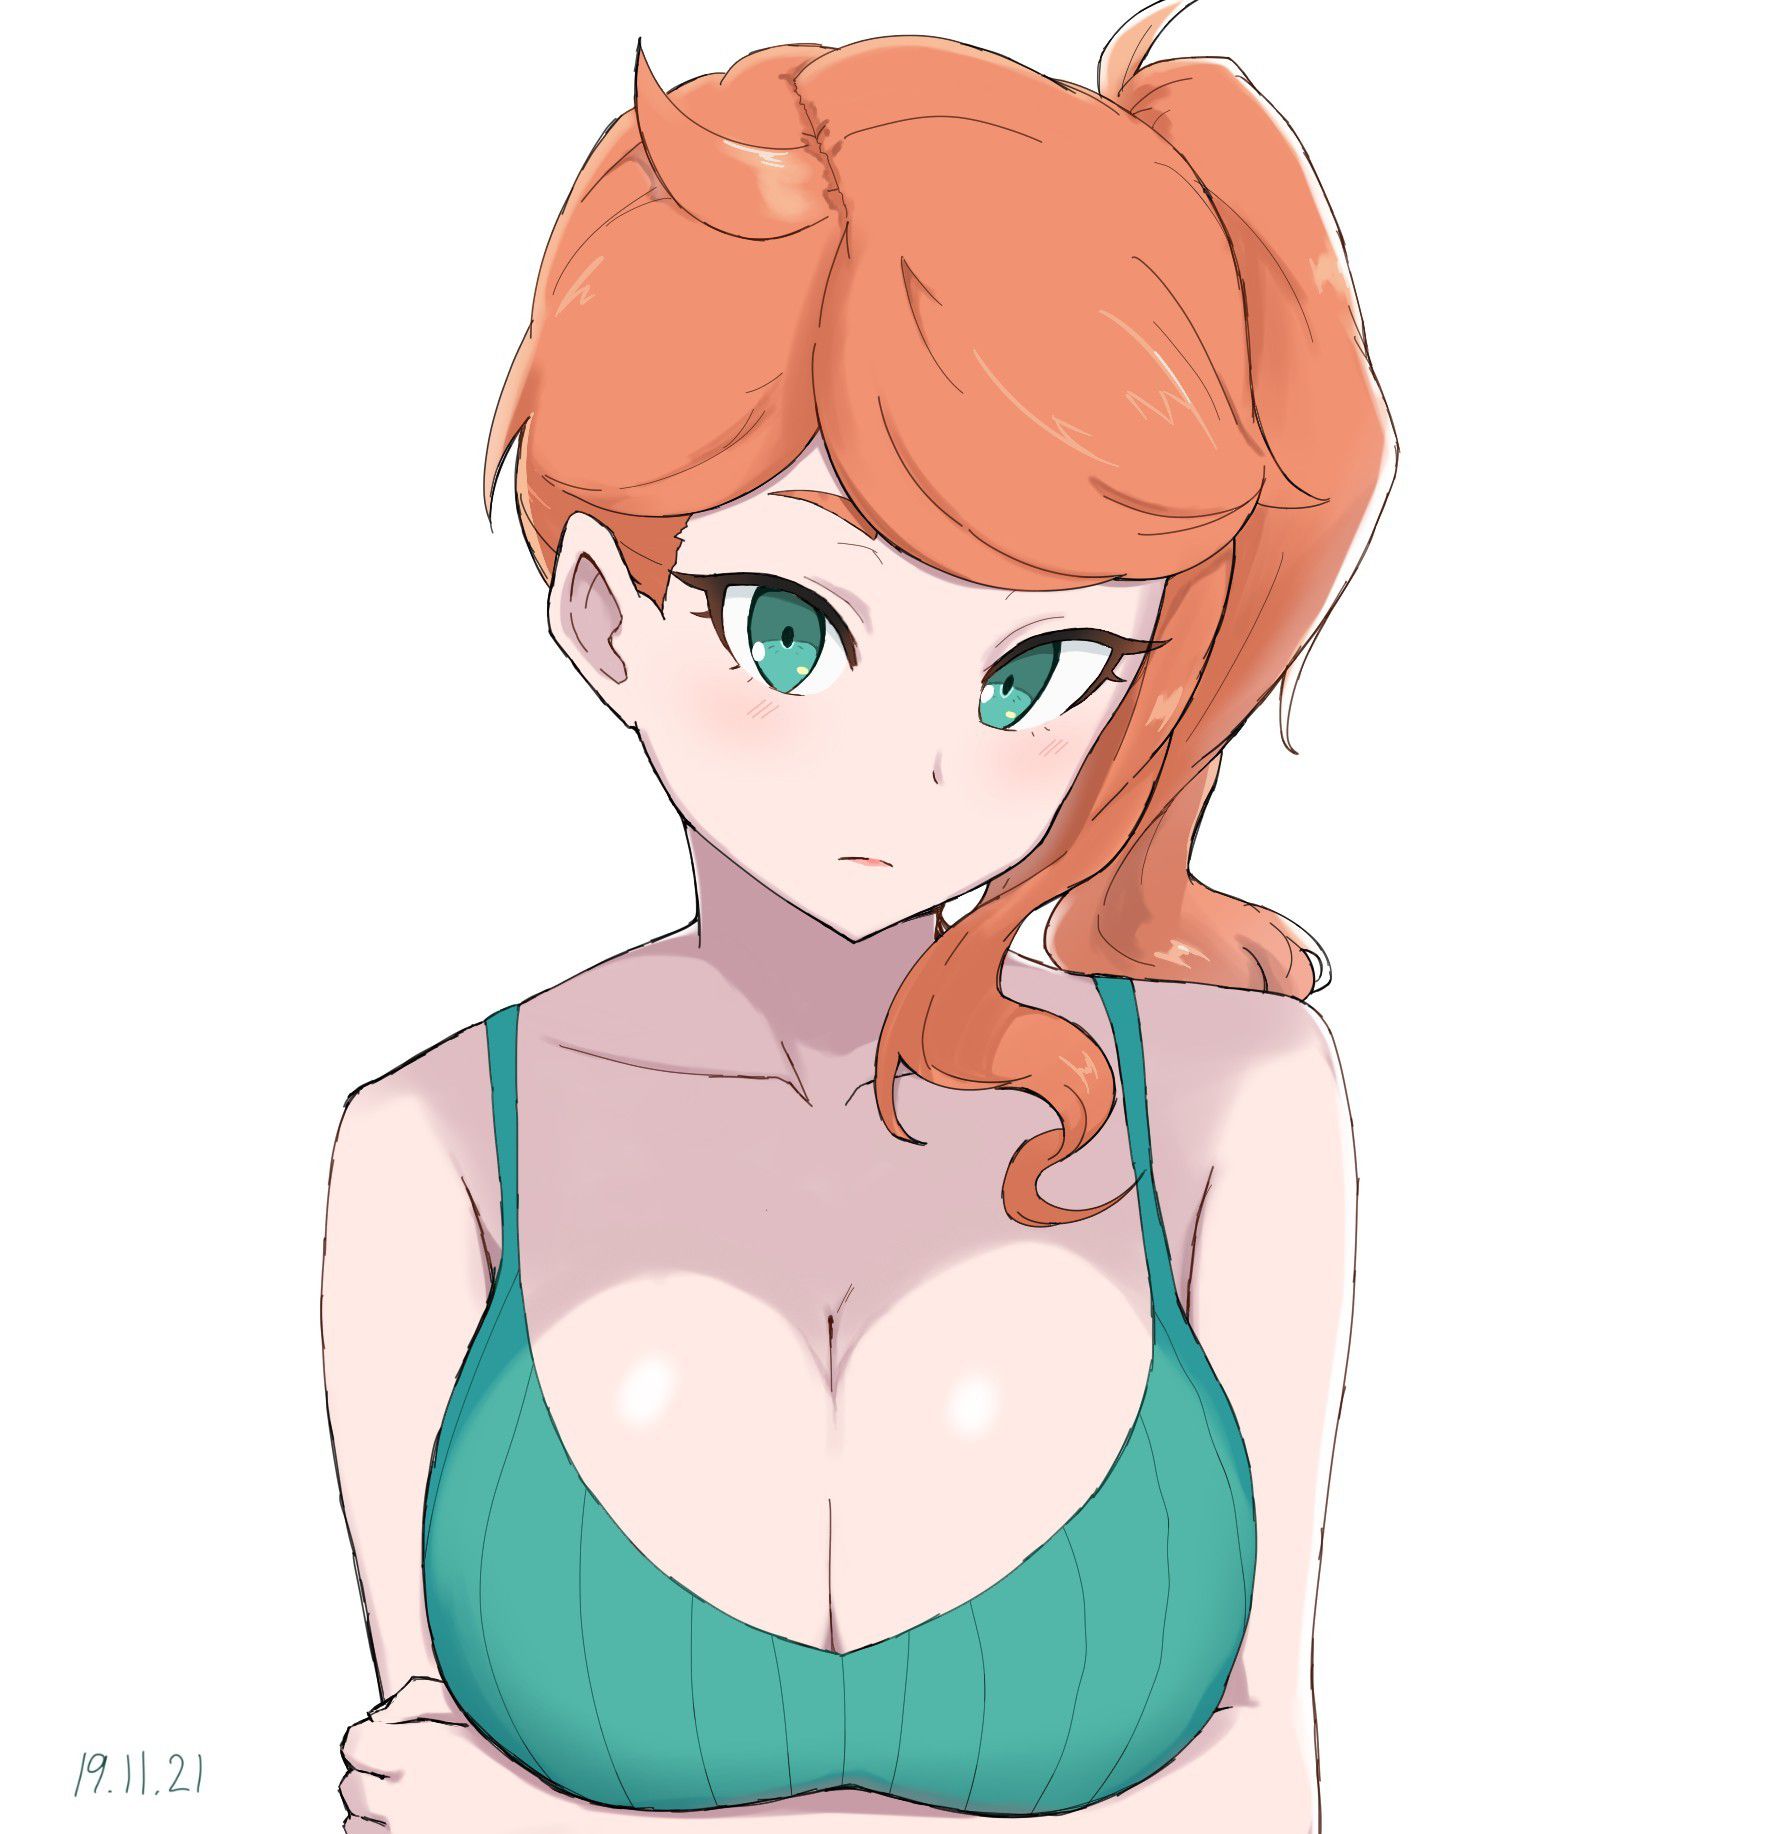 【2nd】Sonia-chan's Erotic Image of Pokemon Part 2 35